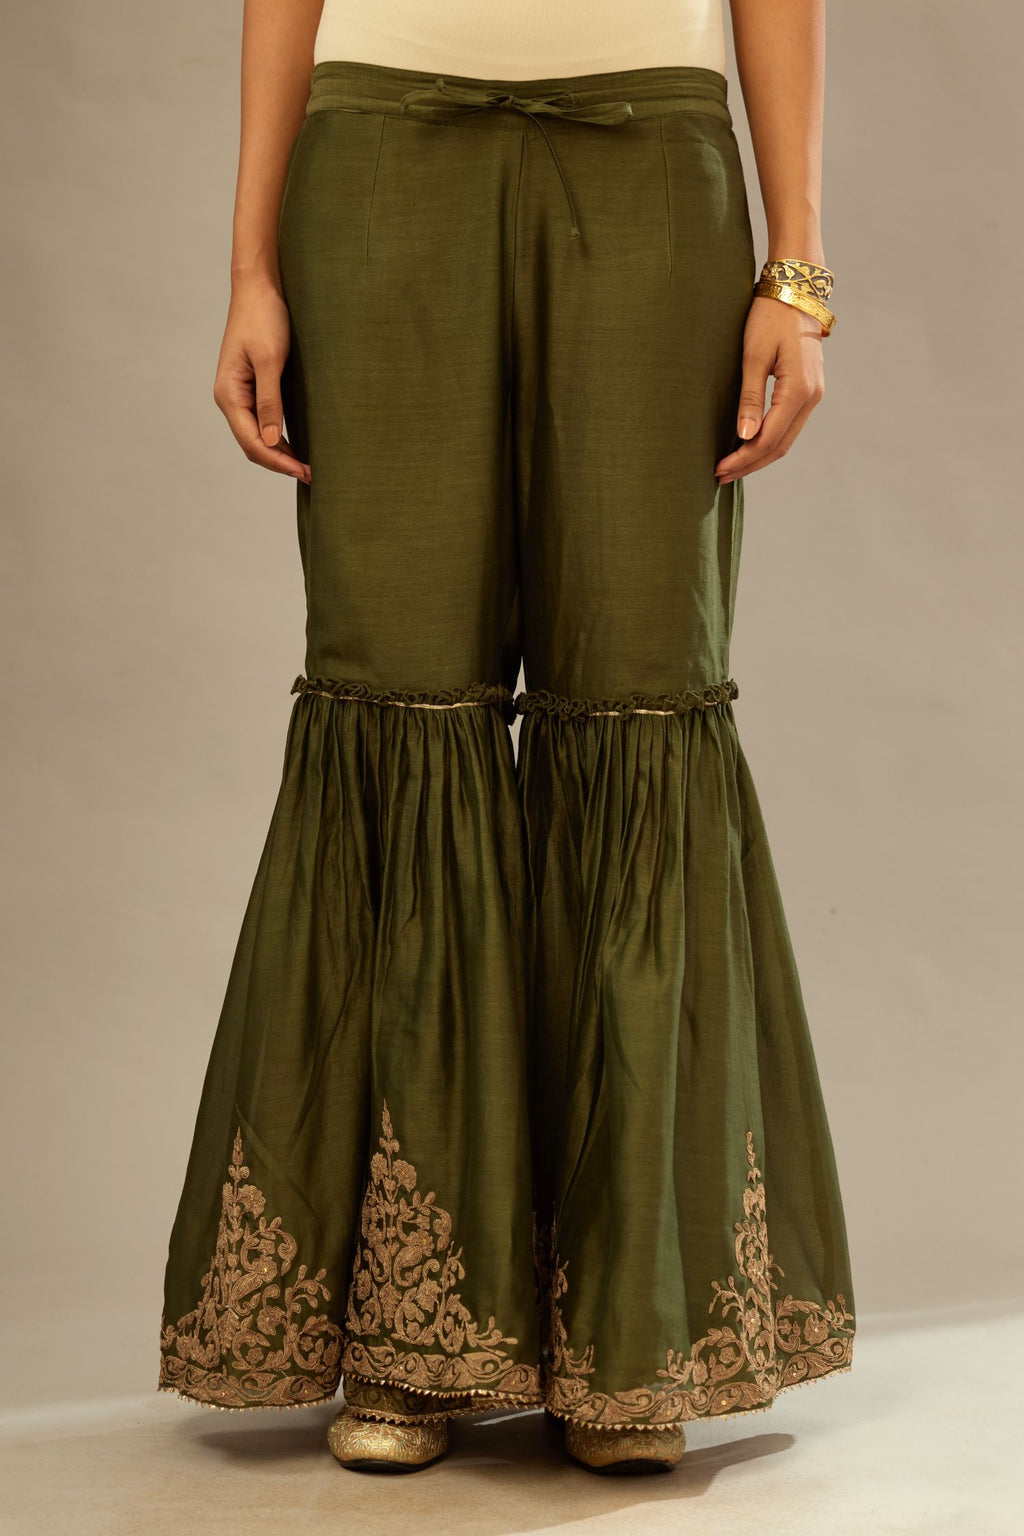 Olive silk chanderi farshi with gold dori embroidery and gota lace at hem.